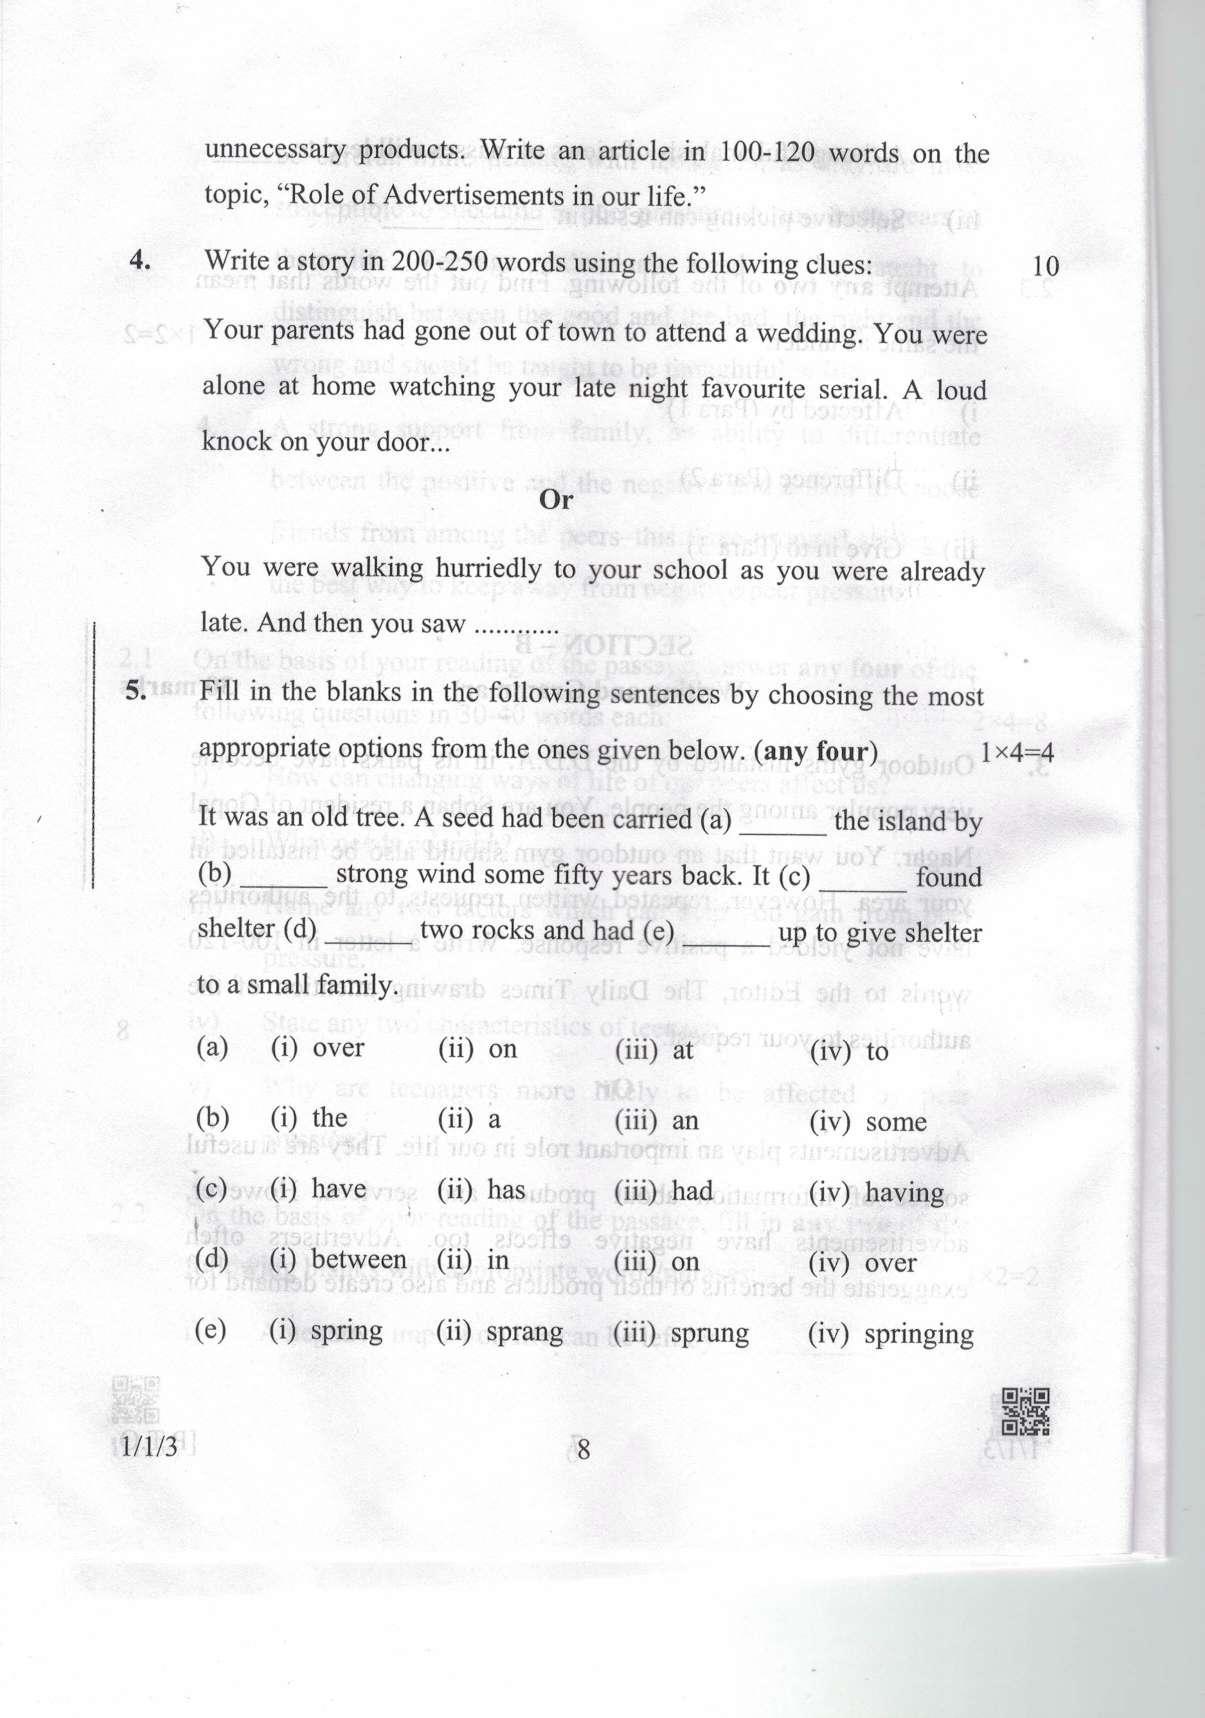 CBSE Class 10 1-1-3 Eng. Comm. 2019 Question Paper - Page 8